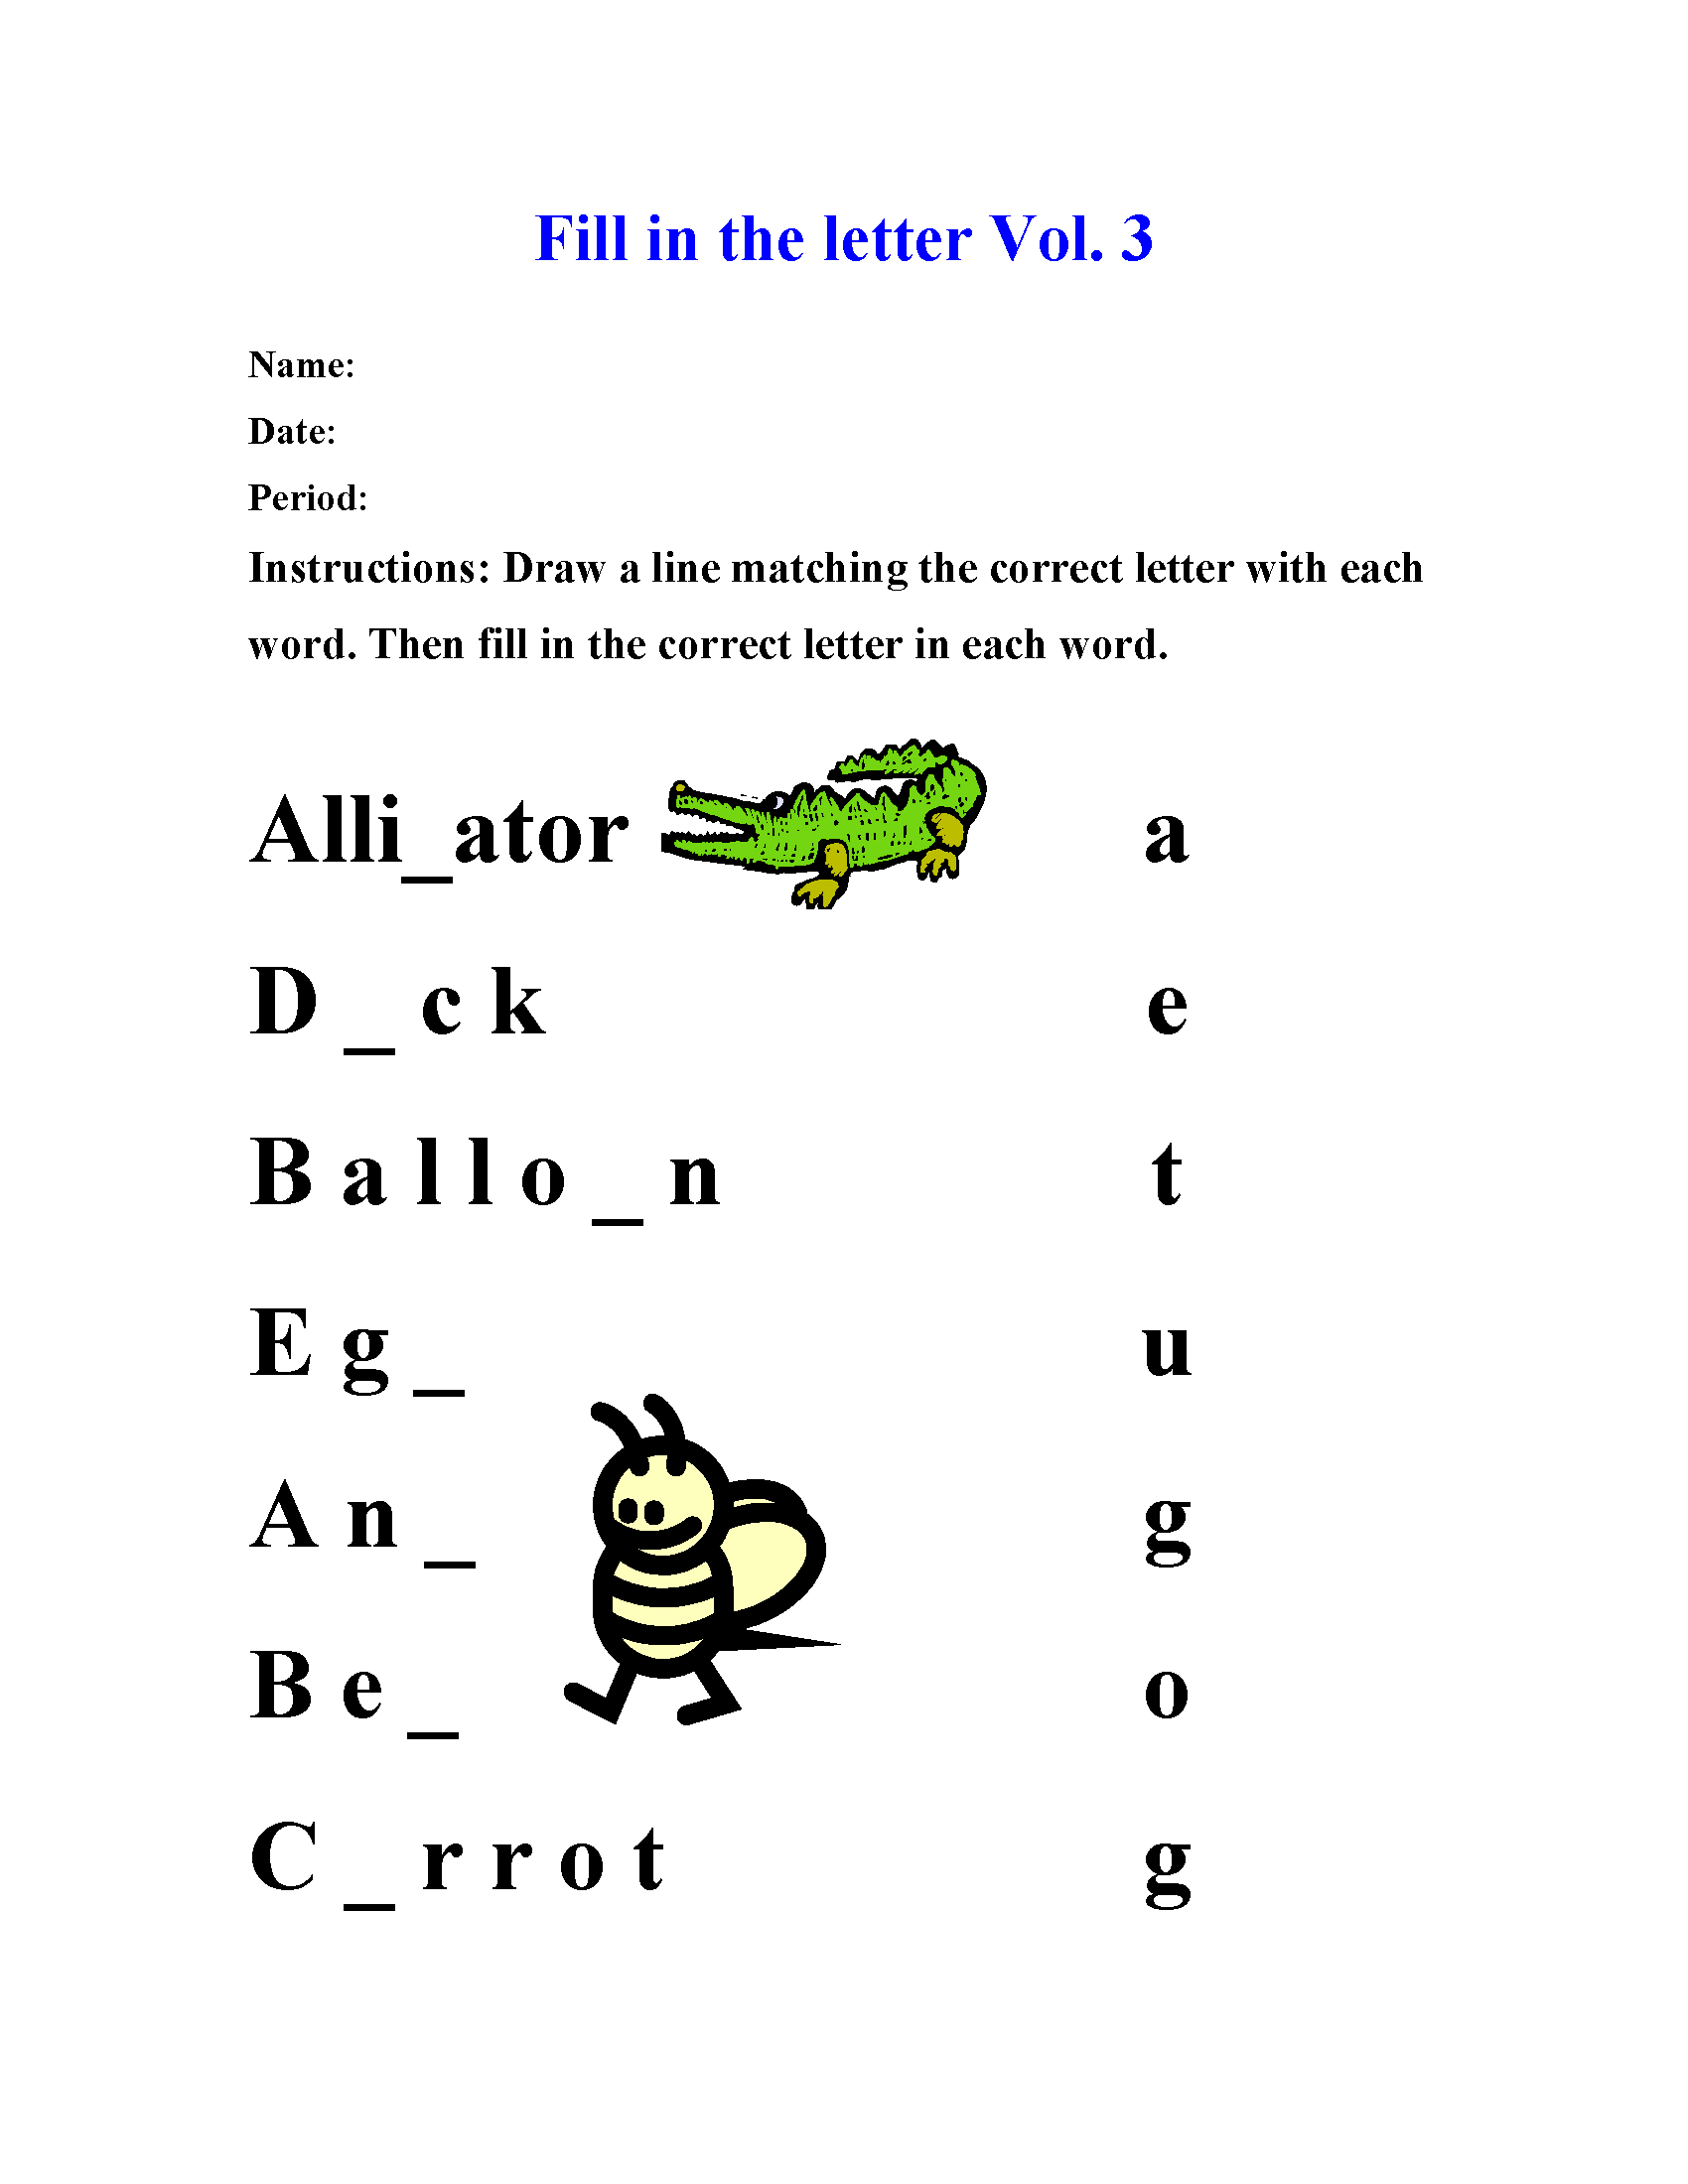 Fill in the letter Vol 3